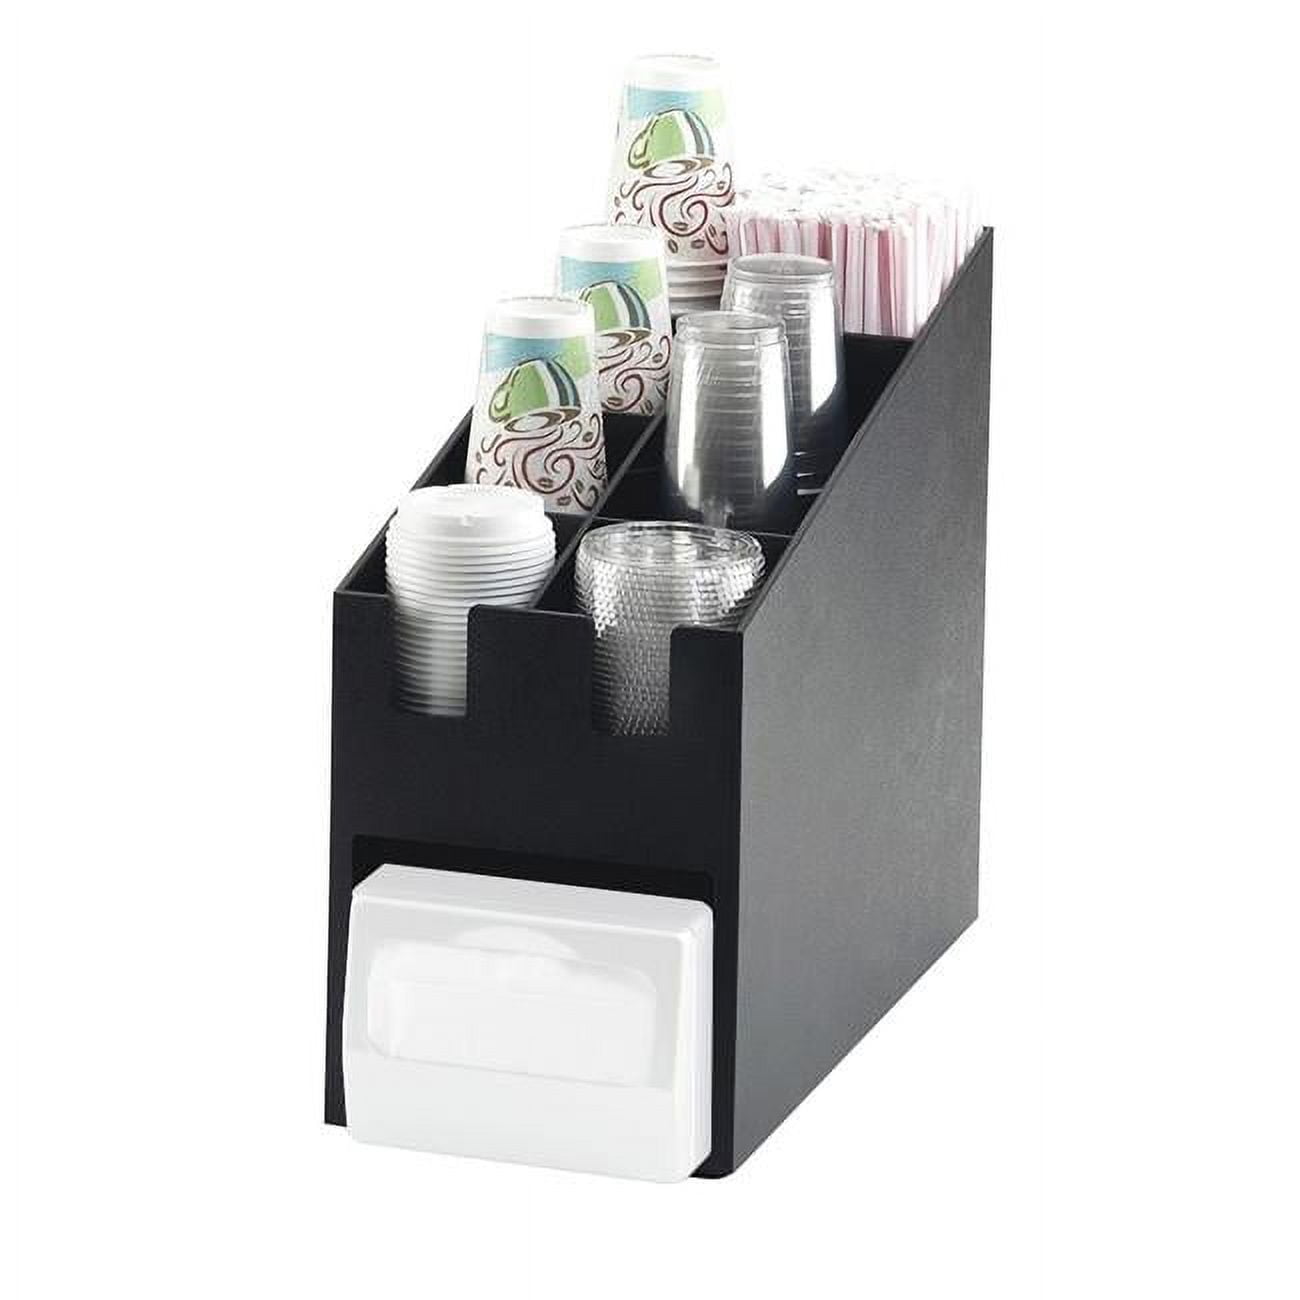 2046 Classic Cup, Lid & Straw Organizer With Napkin Dispenser Slot - 9.125 X 19.25 X 16.375 In.